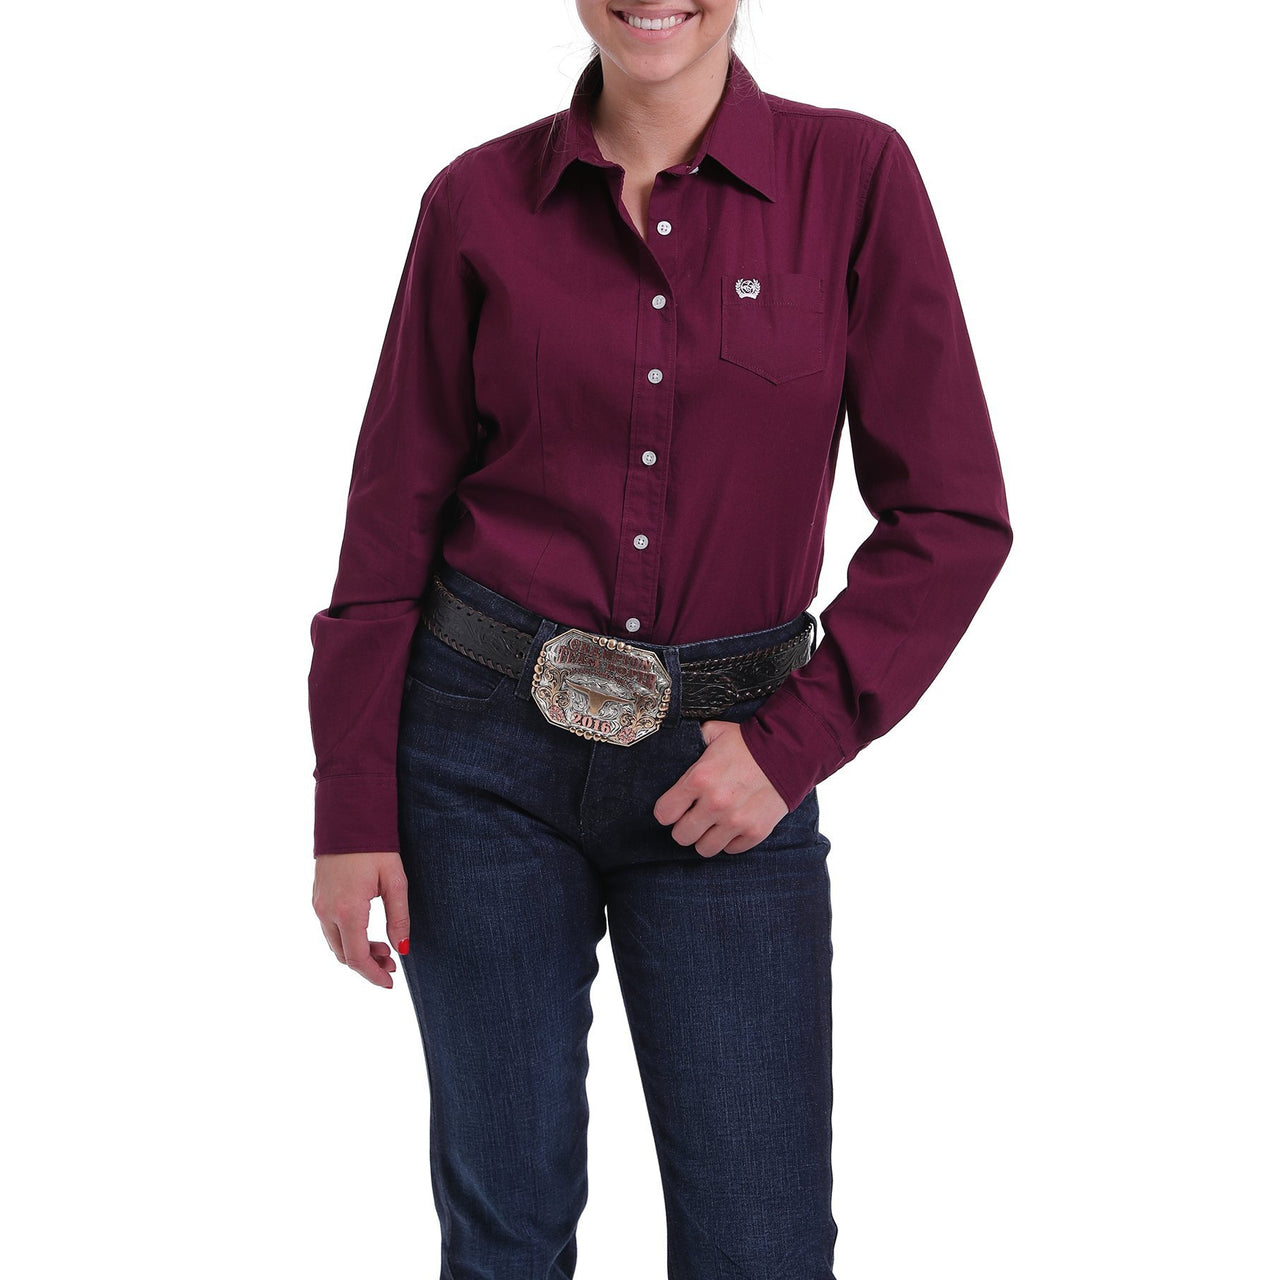 Women's Western Shirt Long Sleeve Embroidered Slim Fit Blusa